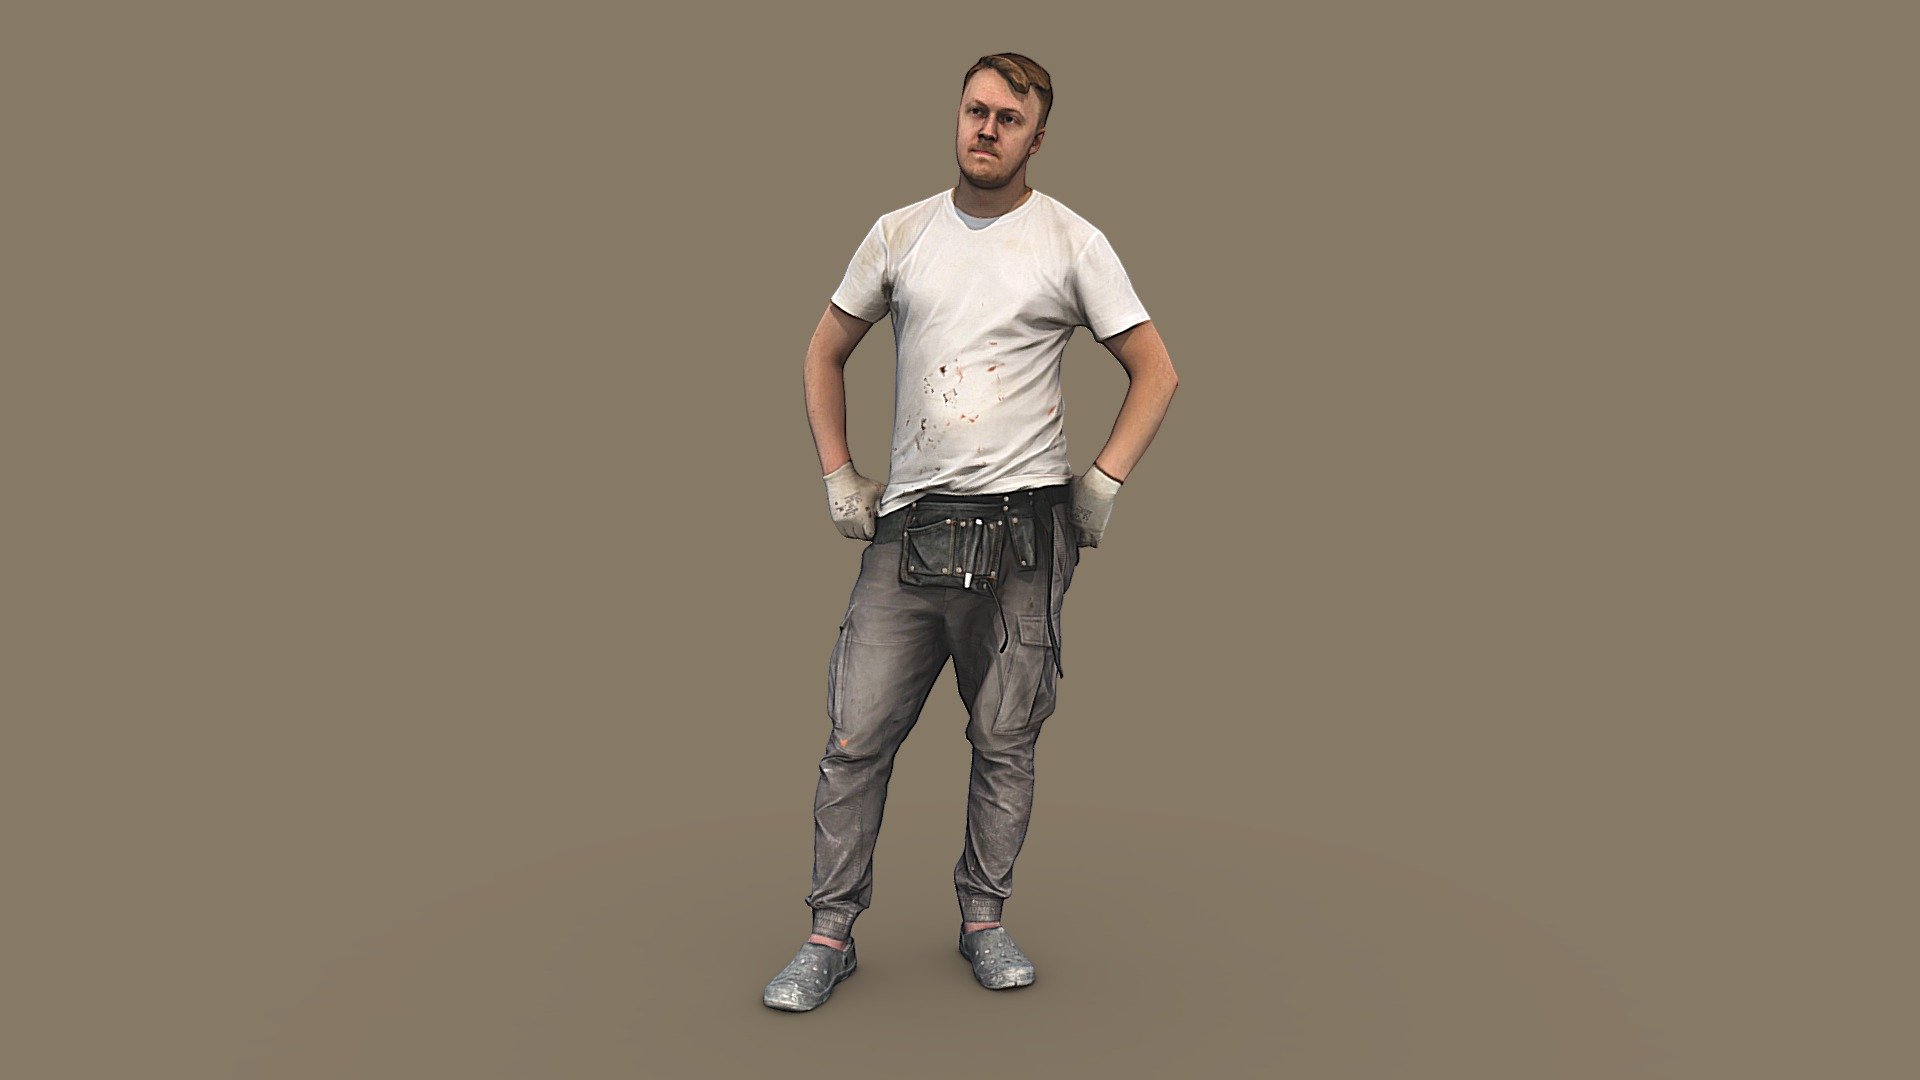 ✉️ A young man, a guy, in construction clothes, in uniform, stands in a relaxed pensive, pose

🦾 This model will be an excellent mid-range participant. It does not need to be very close and try to see the details, it reveals and demonstrates its texture as much as possible in case of a certain distance from the foreground.

⚙️ Photorealistic Construction Worker Character 3d model ready for Virtual Reality (VR), Augmented Reality (AR), games and other real-time apps. 
Suitable for the architectural visualization and another graphical projects.
50 000 polygons per model 3d model